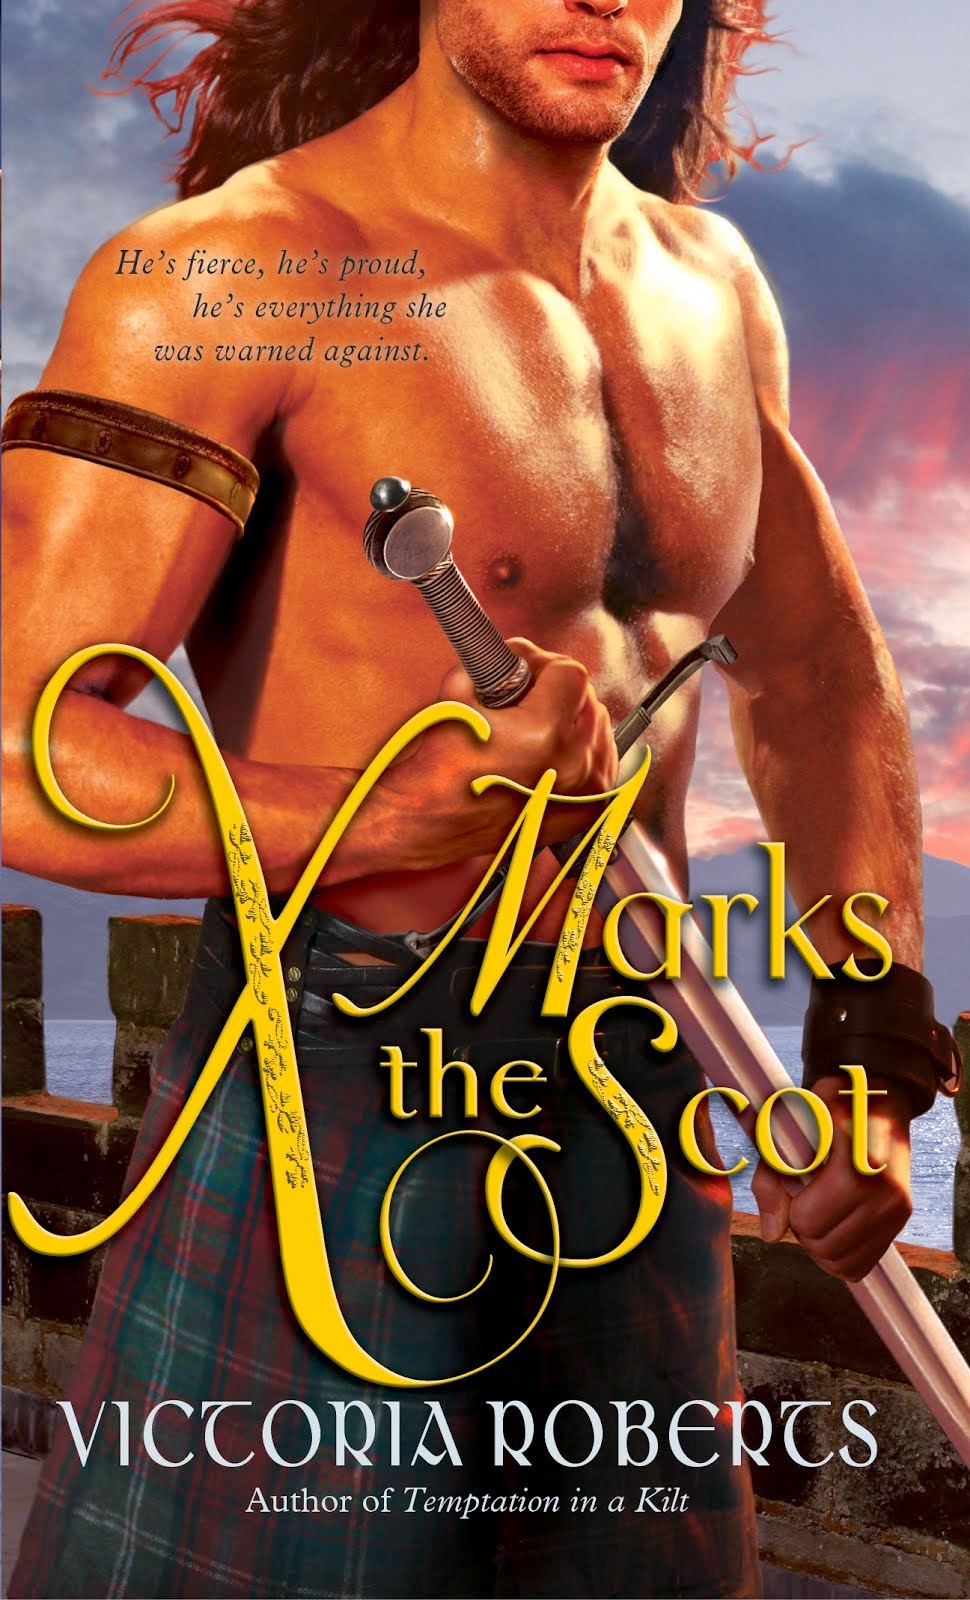 X Marks the Scot ~ 2013 RT Reviewers' Choice Award Winner, Book #2 of Bad Boys of the Highlands